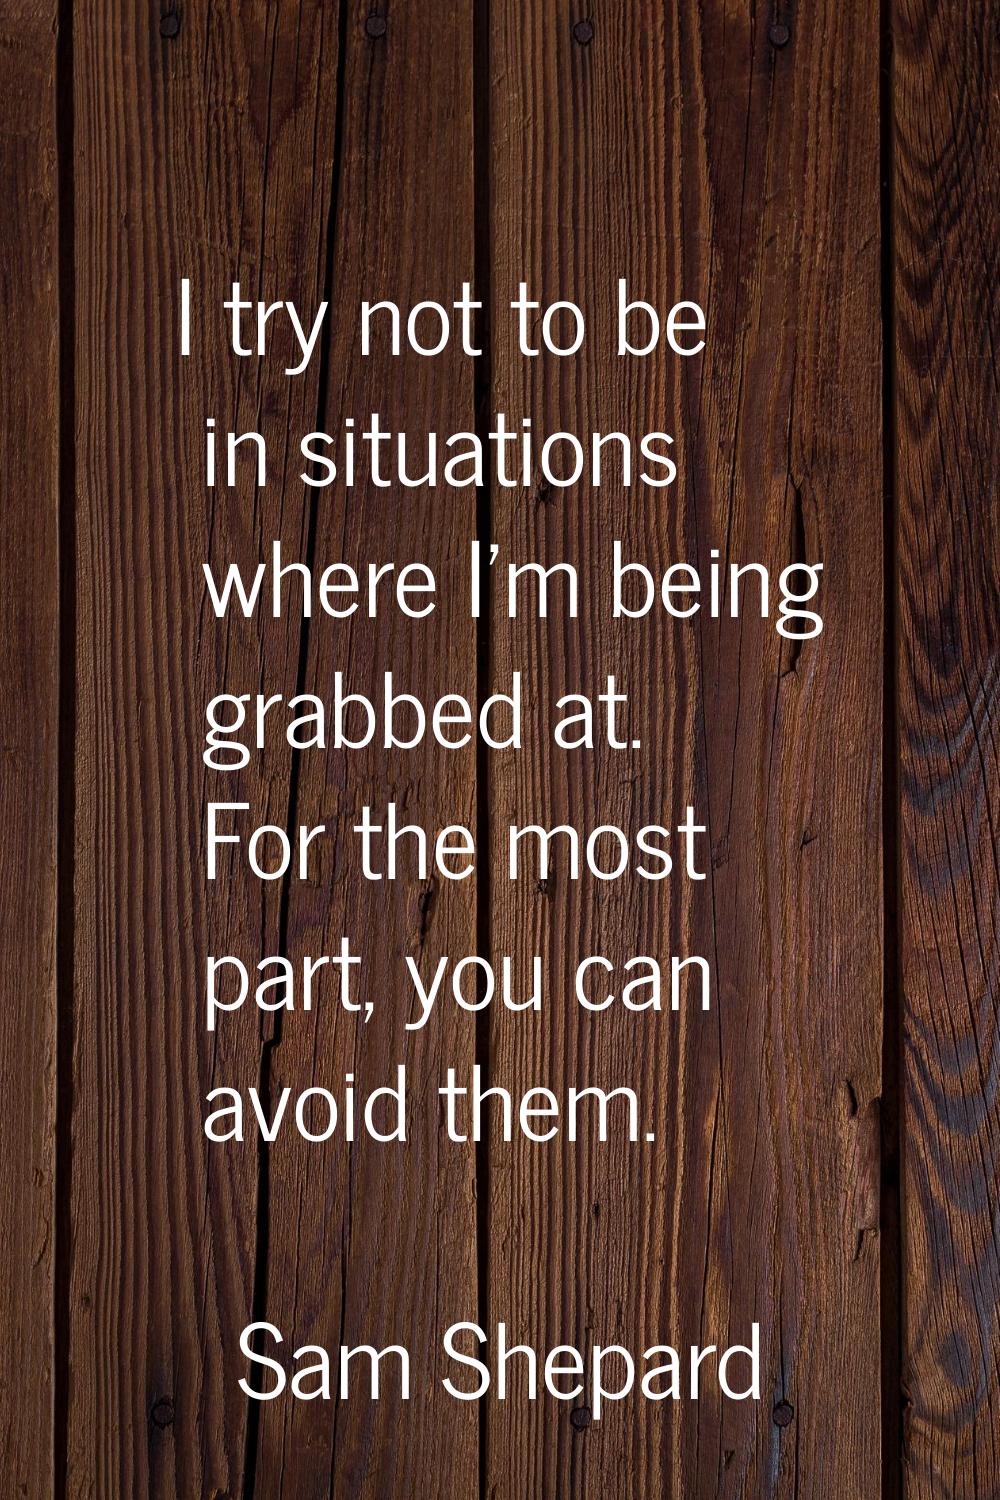 I try not to be in situations where I'm being grabbed at. For the most part, you can avoid them.